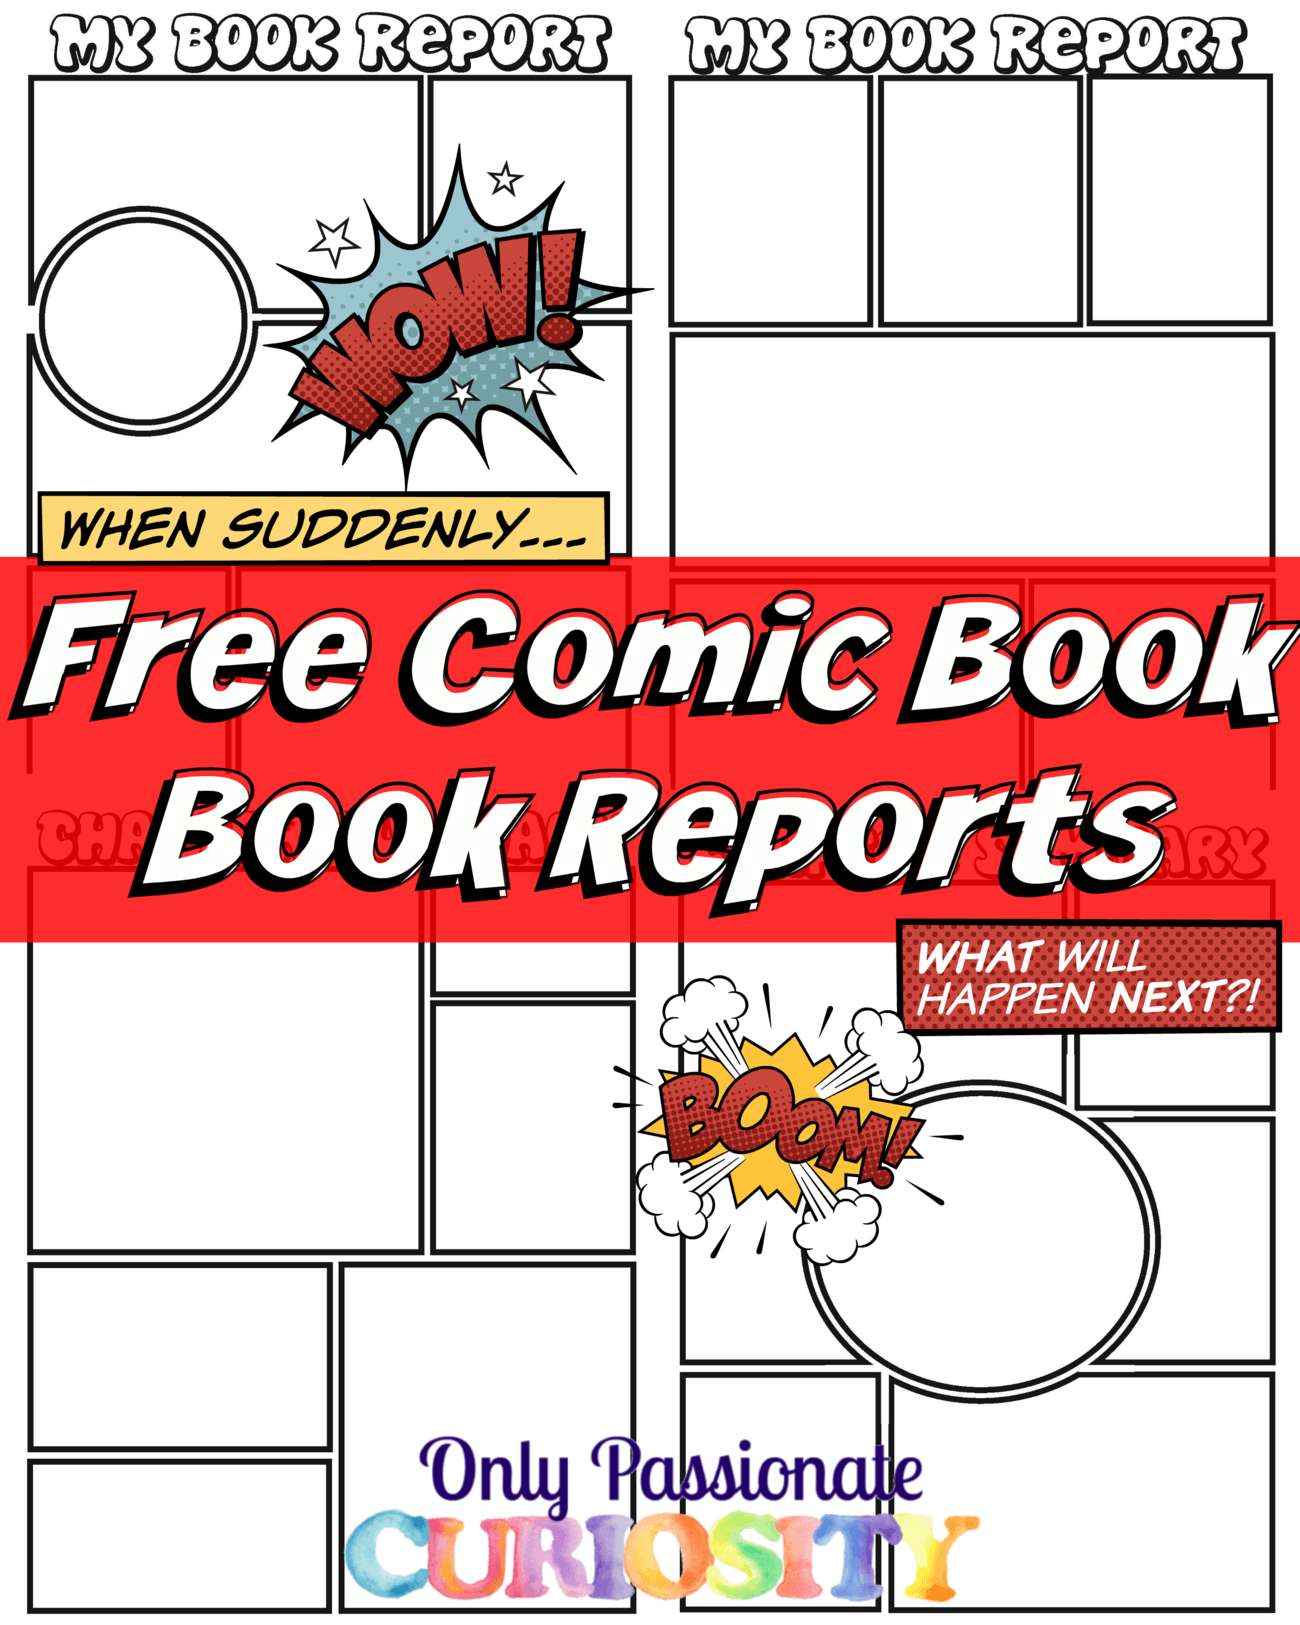 how to make a comic strip for a book report